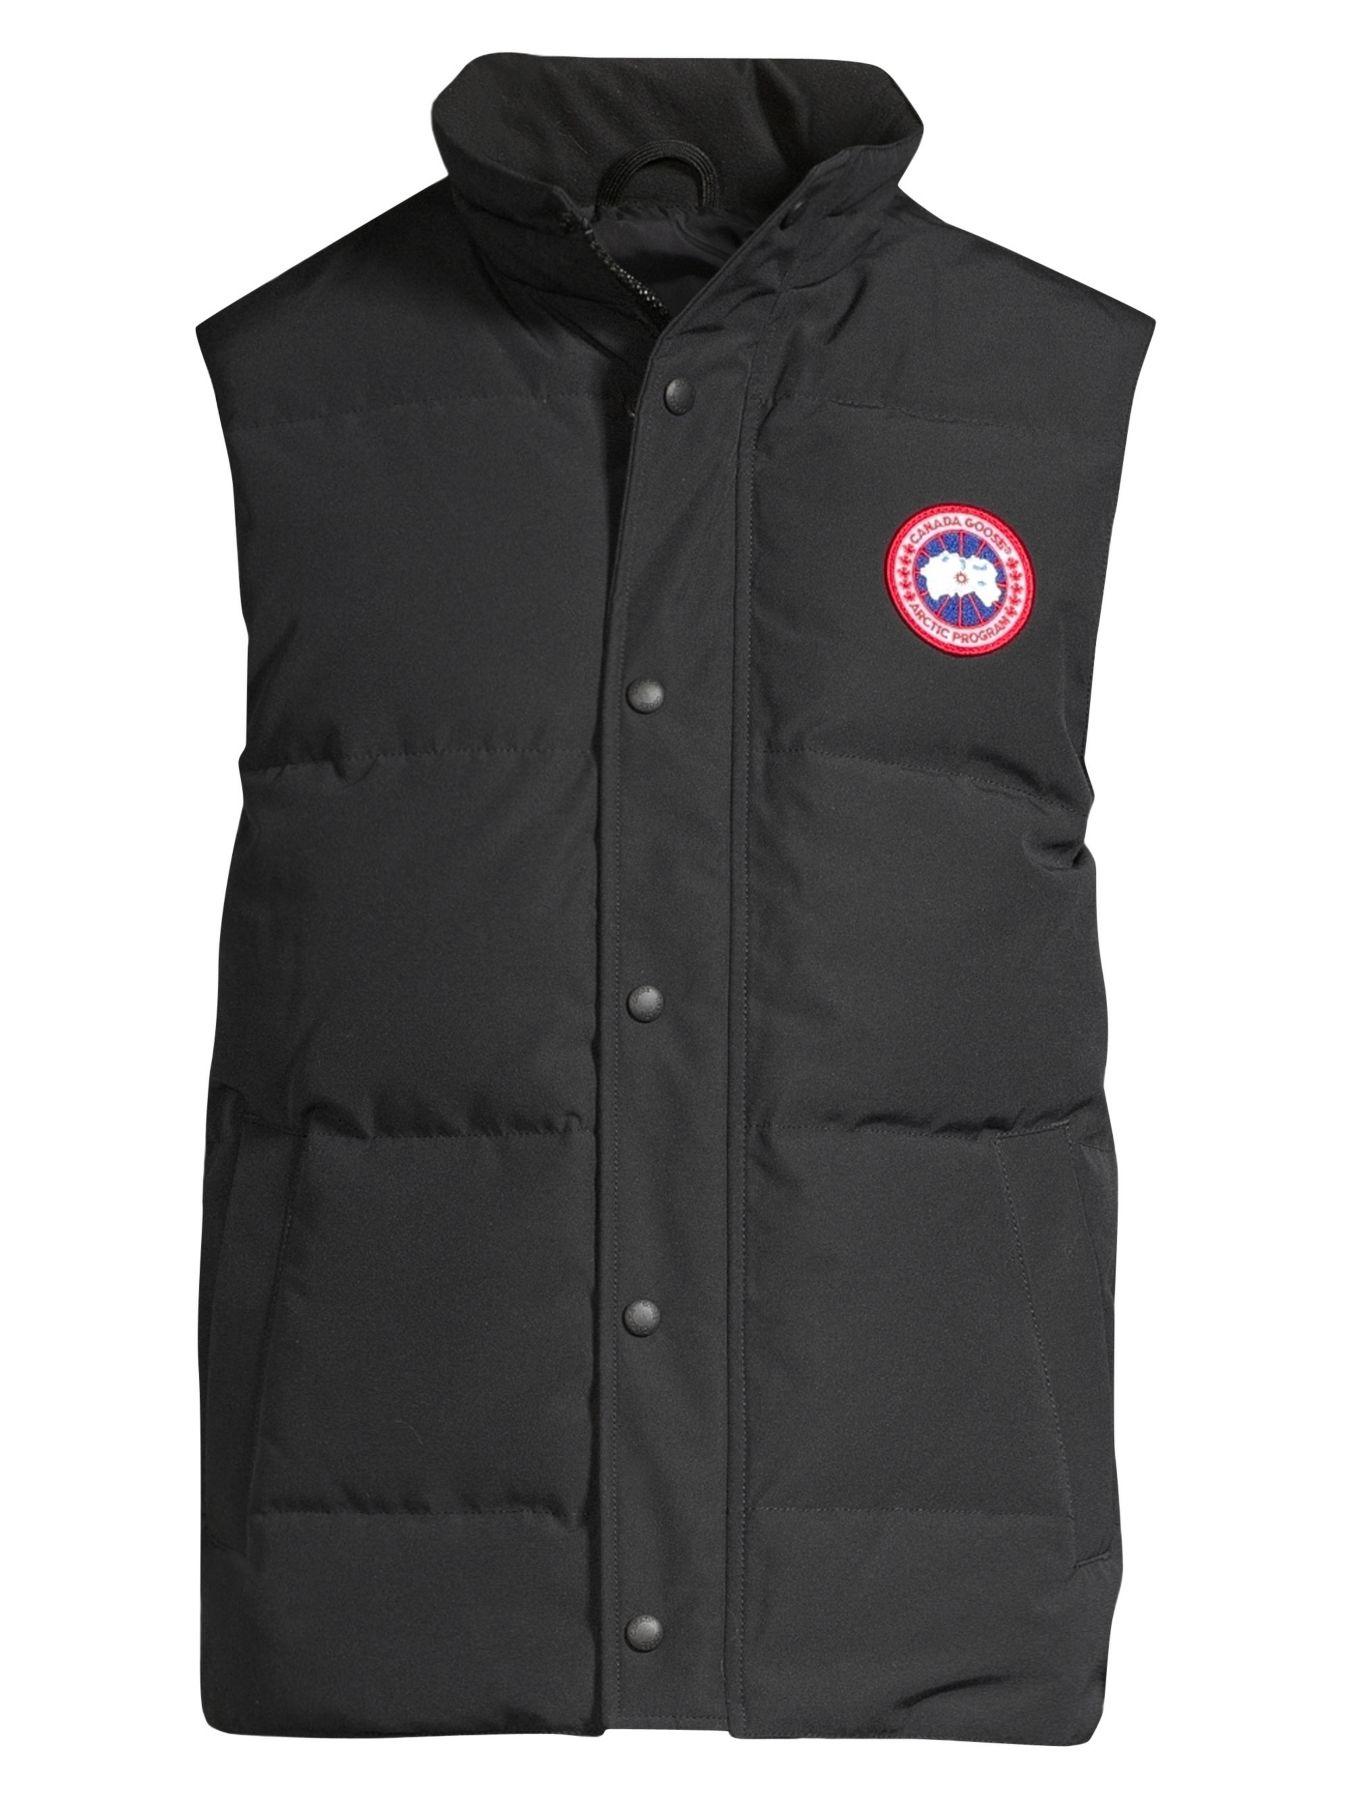 Canada Goose Synthetic Garson Down Vest in Navy (Blue) for Men - Lyst